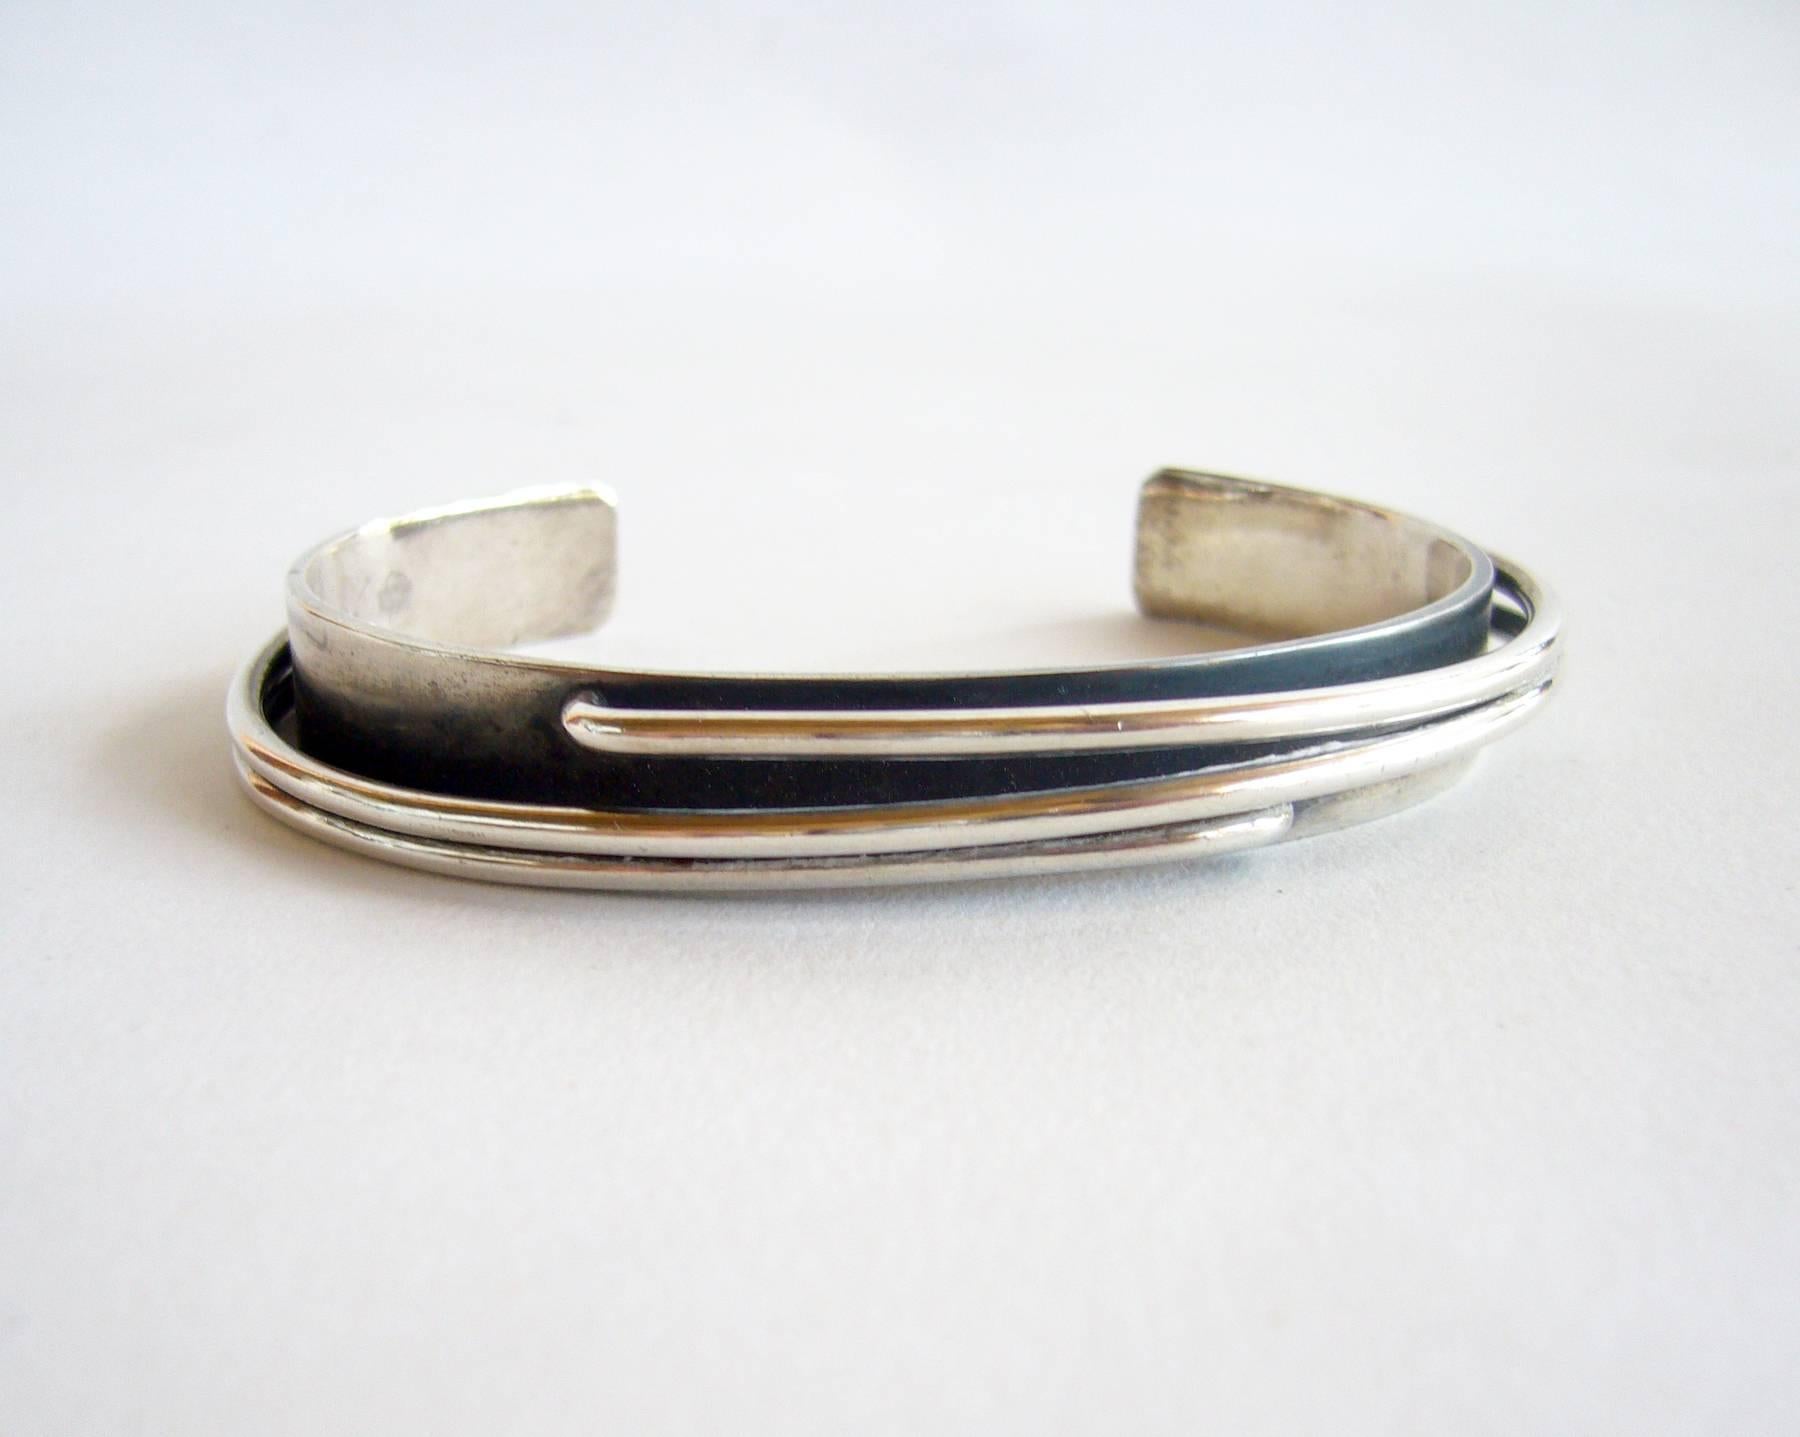 Handmade sterling silver narrow cuff bracelet created by Jules Brenner of New York City, NY.  Cuff measures 3/8